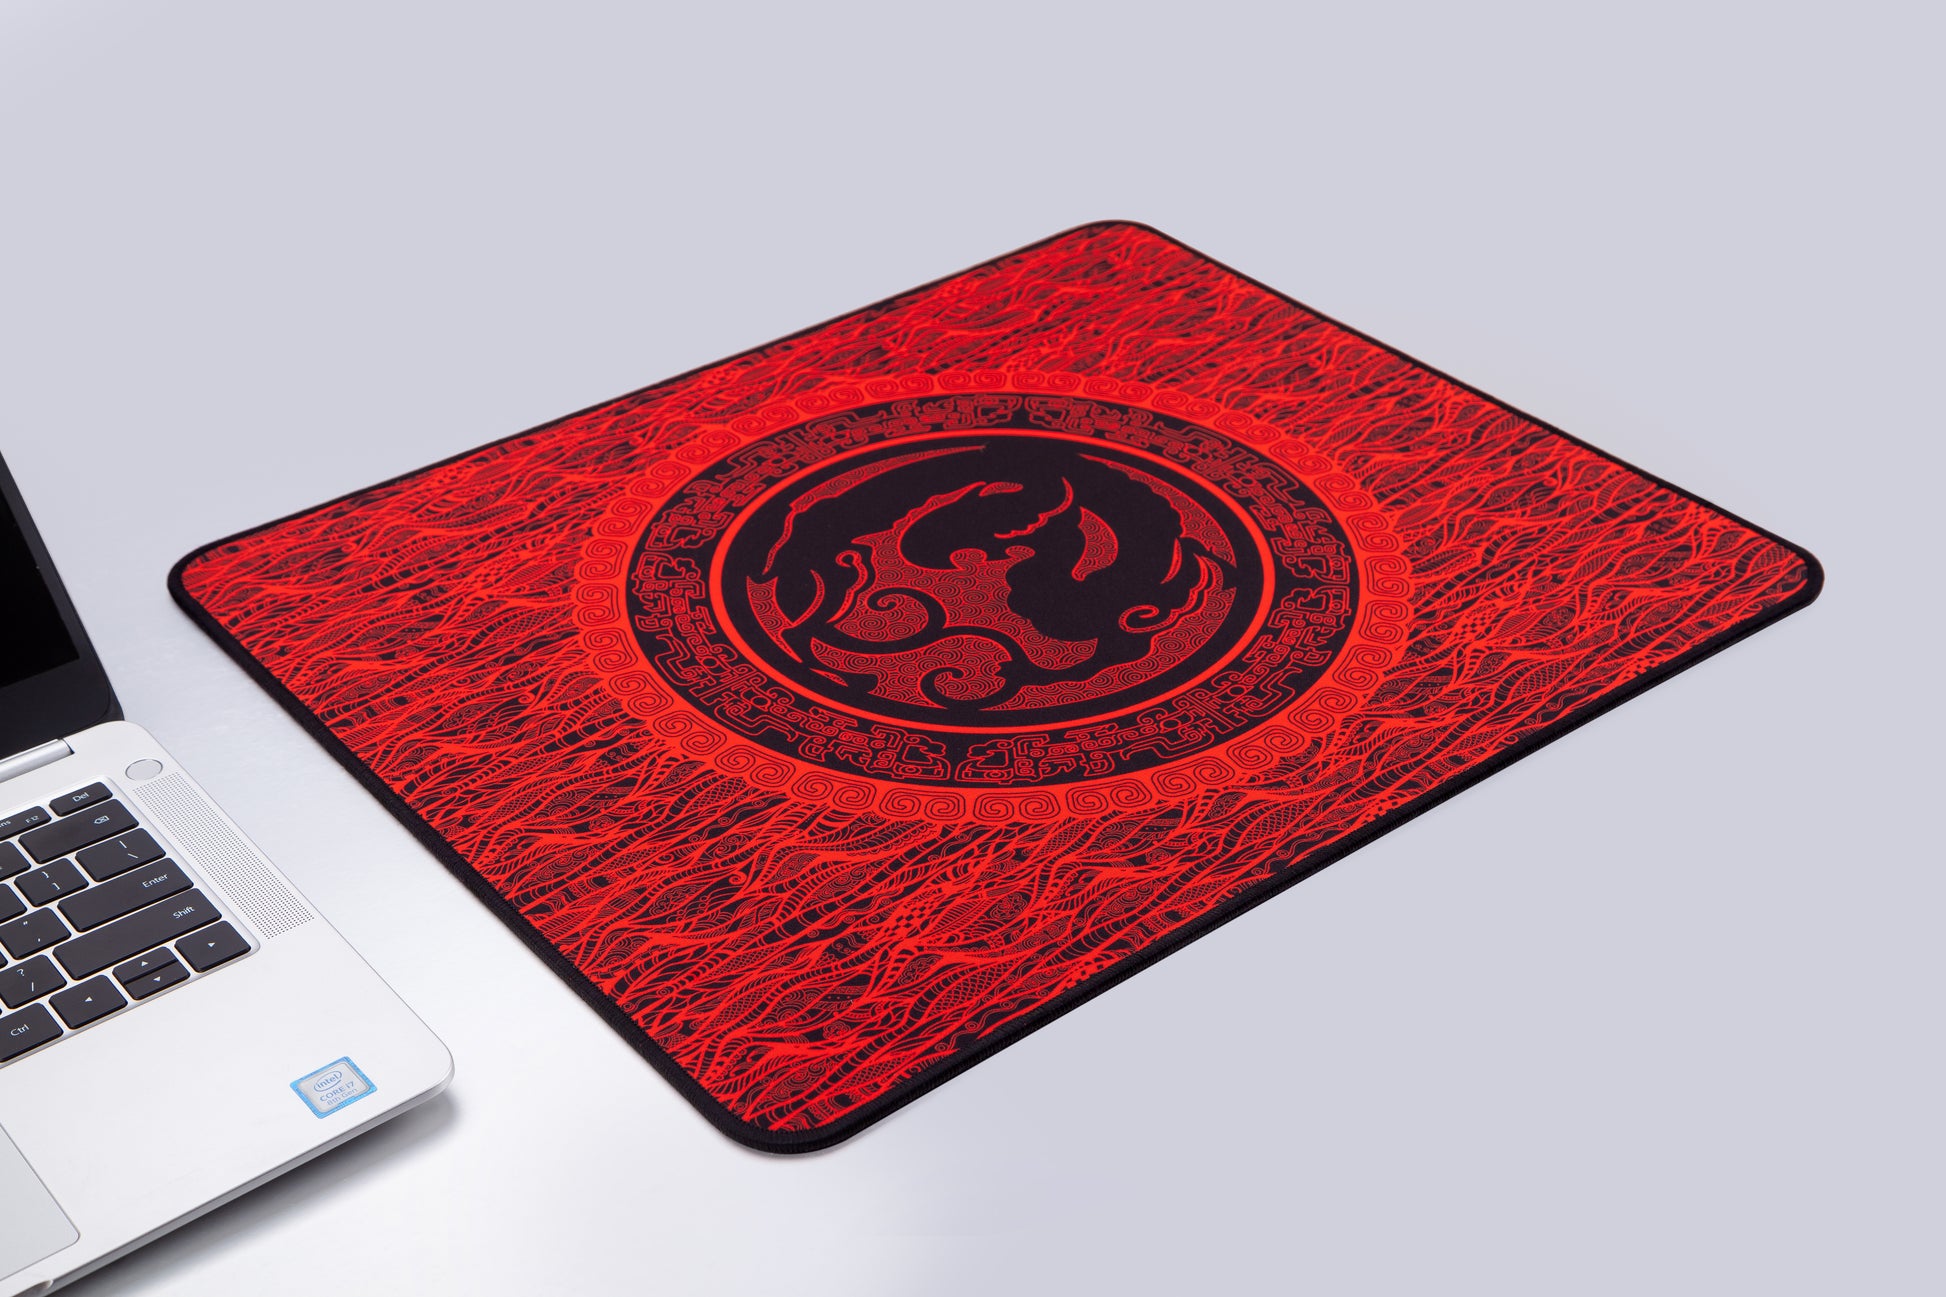 EspTiger Qingsui Xuan Gaming Mouse Pad - Large (480 x 400 x 4mm) - Stitched Edges, Non-Slip Rubber Base, Cloth Surface